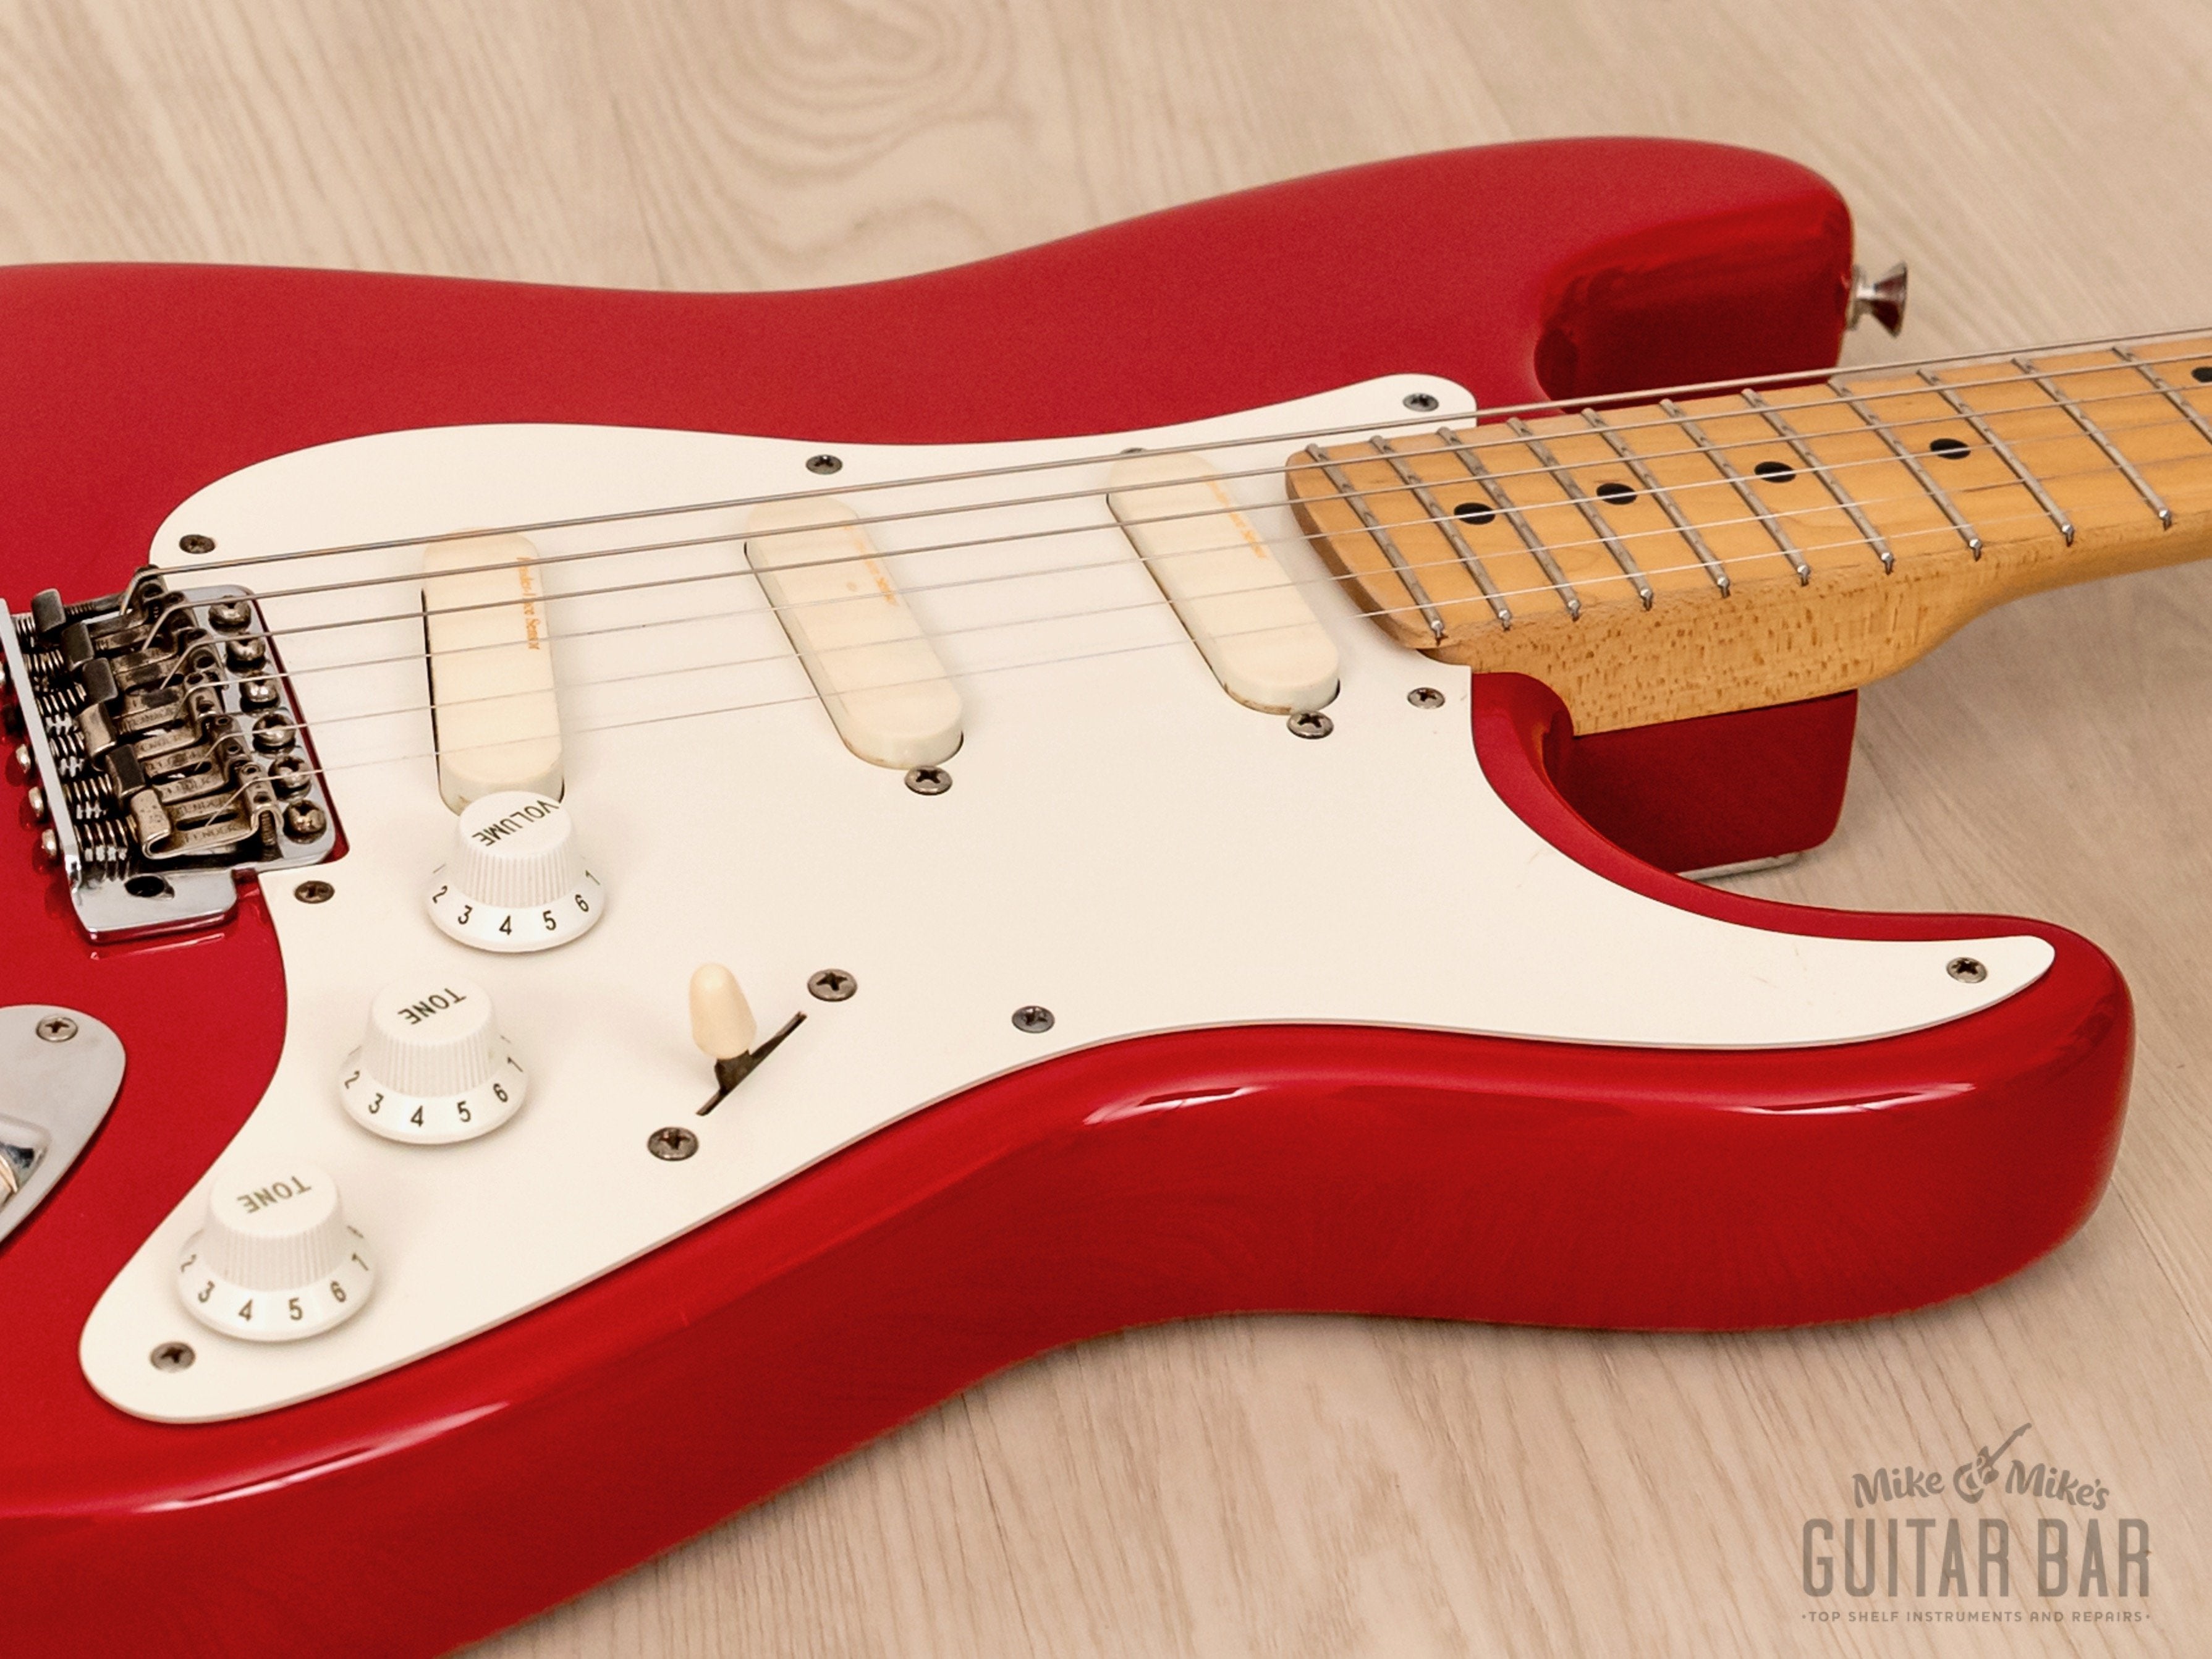 1988 Fender Eric Clapton Signature Stratocaster Torino Red, First Year w/ Lace Sensors, Tweed Case